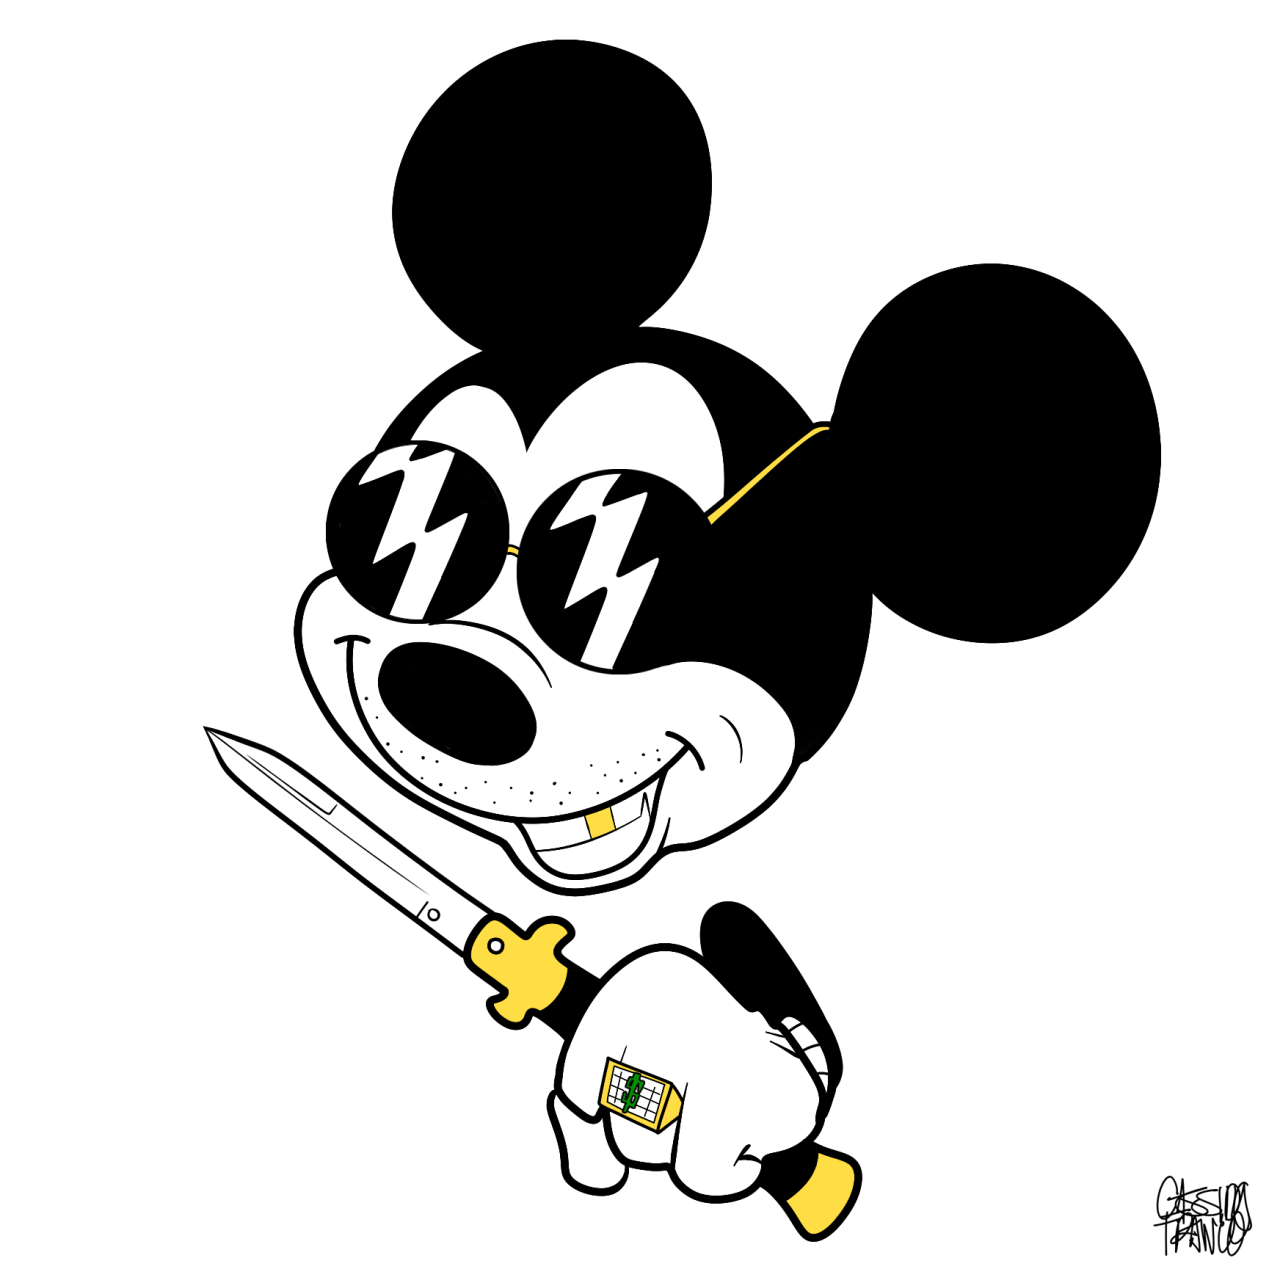 gangster mickey mouse. Stuff to buy in 2019